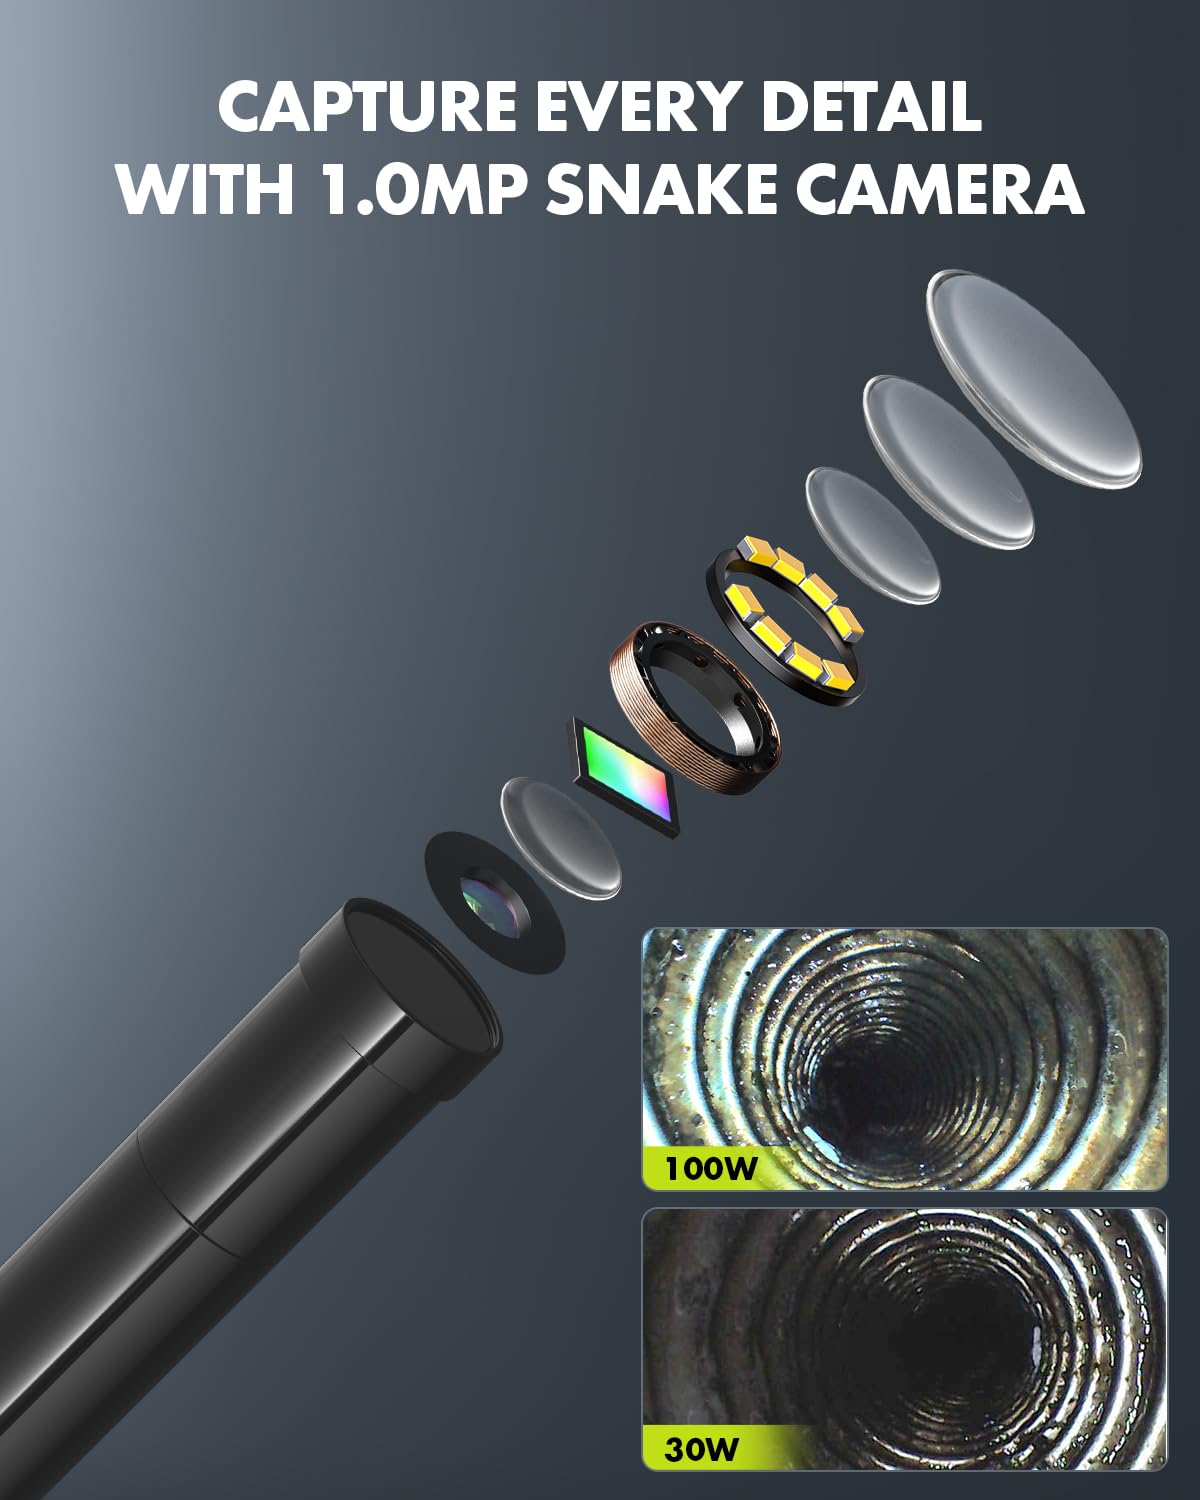 Endoscope Camera with Light, 1080P 1.0MP Borescope with 8 LED Lights, USB Endoscope with Semi-Rigid Snake Camera, IP67 Waterproof Inspection Camera for iPhone, iPad, OTG Android Phone